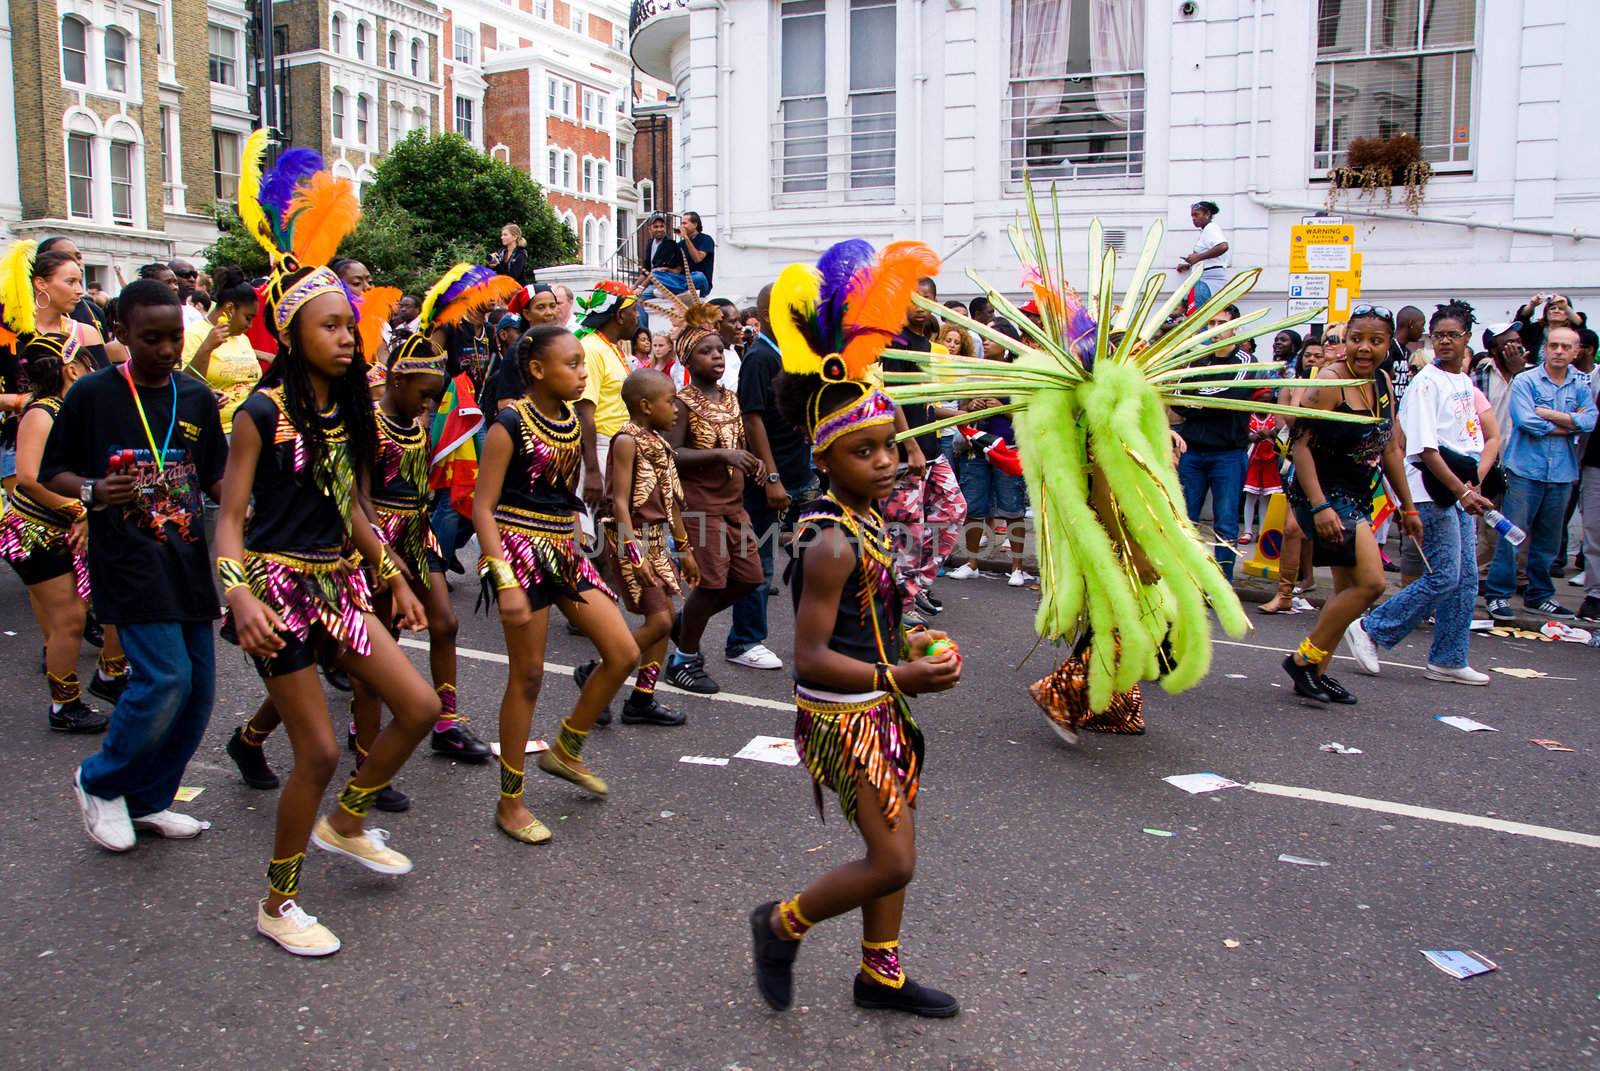 Notting Hill Carnival by fcarucci